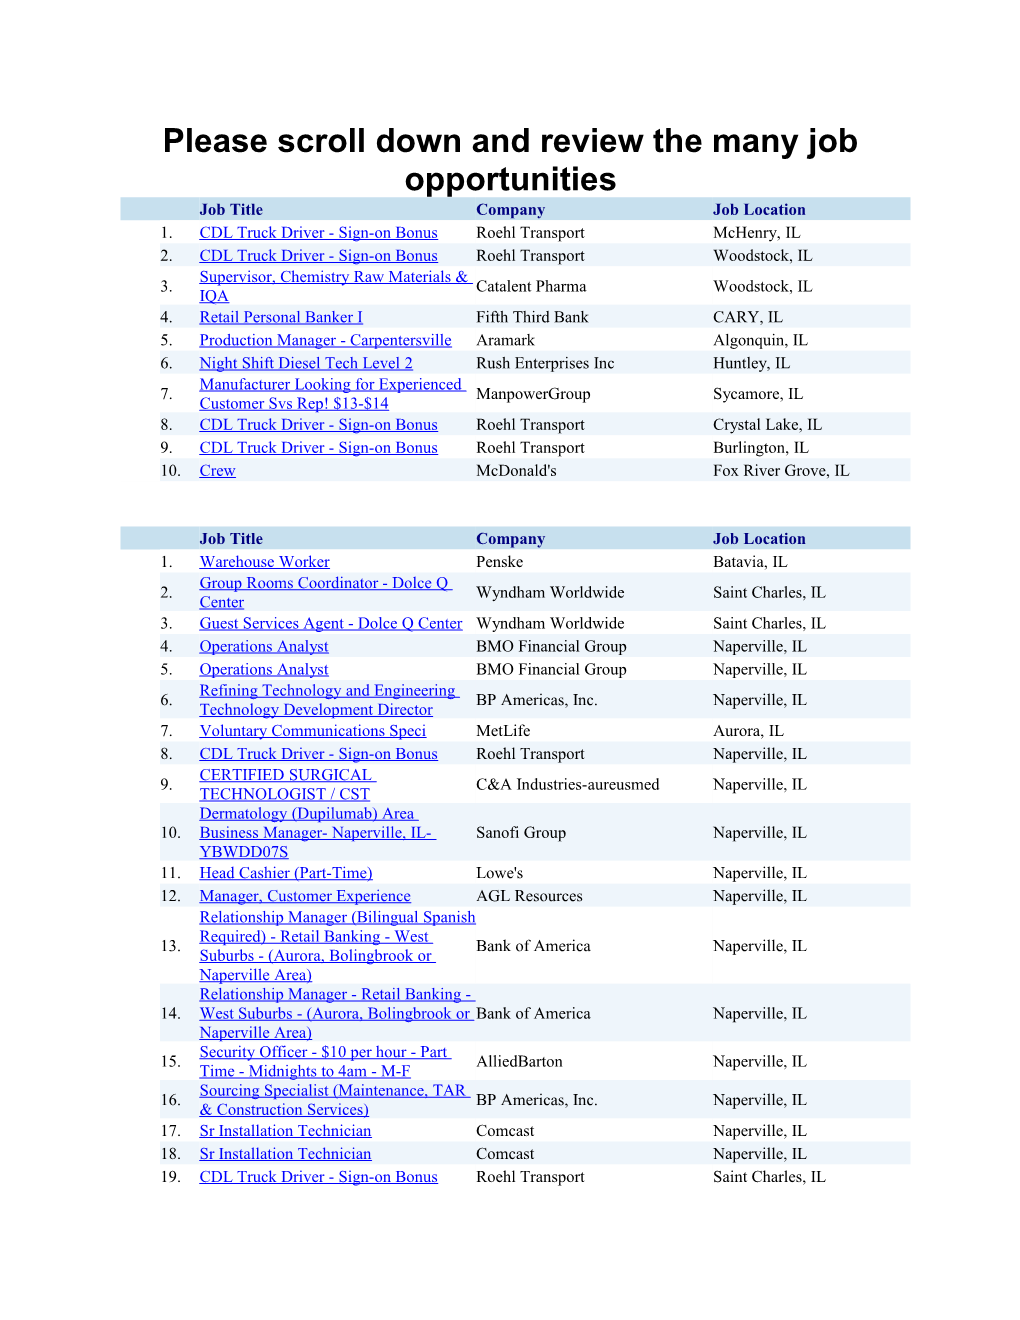 Please Scroll Down and Review the Many Job Opportunities